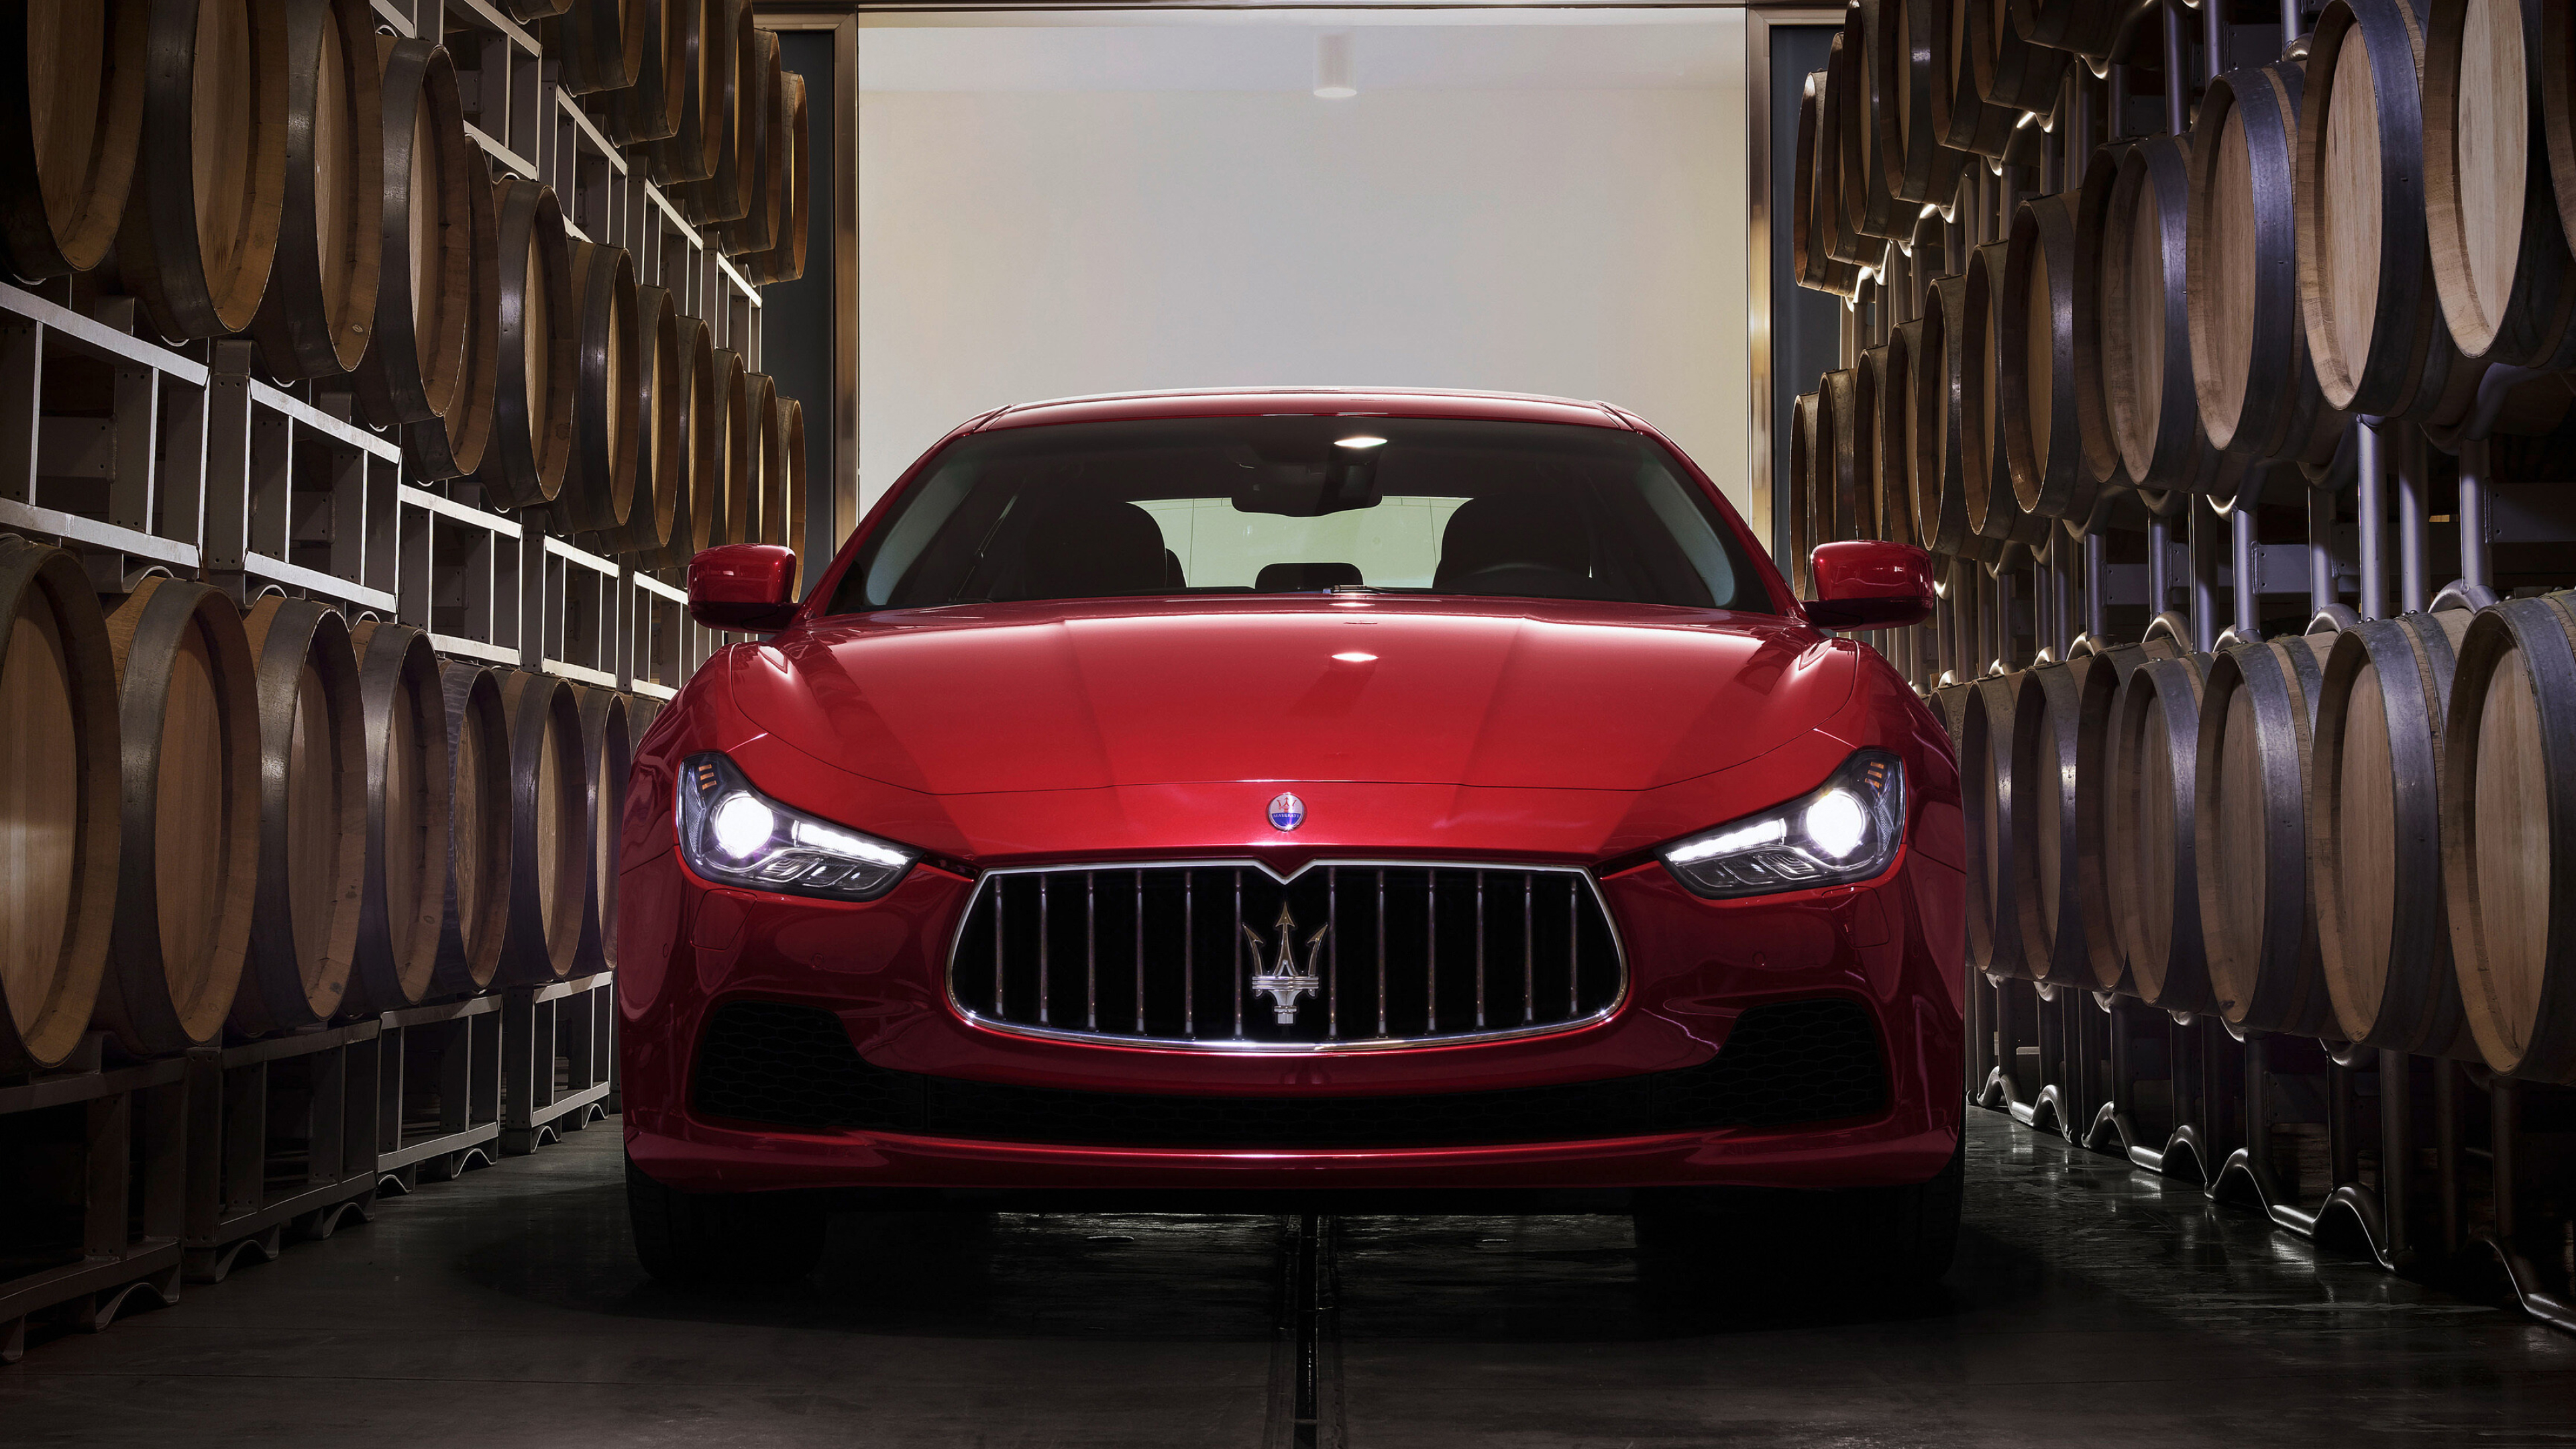 Maserati: An Italian luxury vehicle manufacturer, Established on 1 December 1914, in Bologna, Italy. 3840x2160 4K Wallpaper.